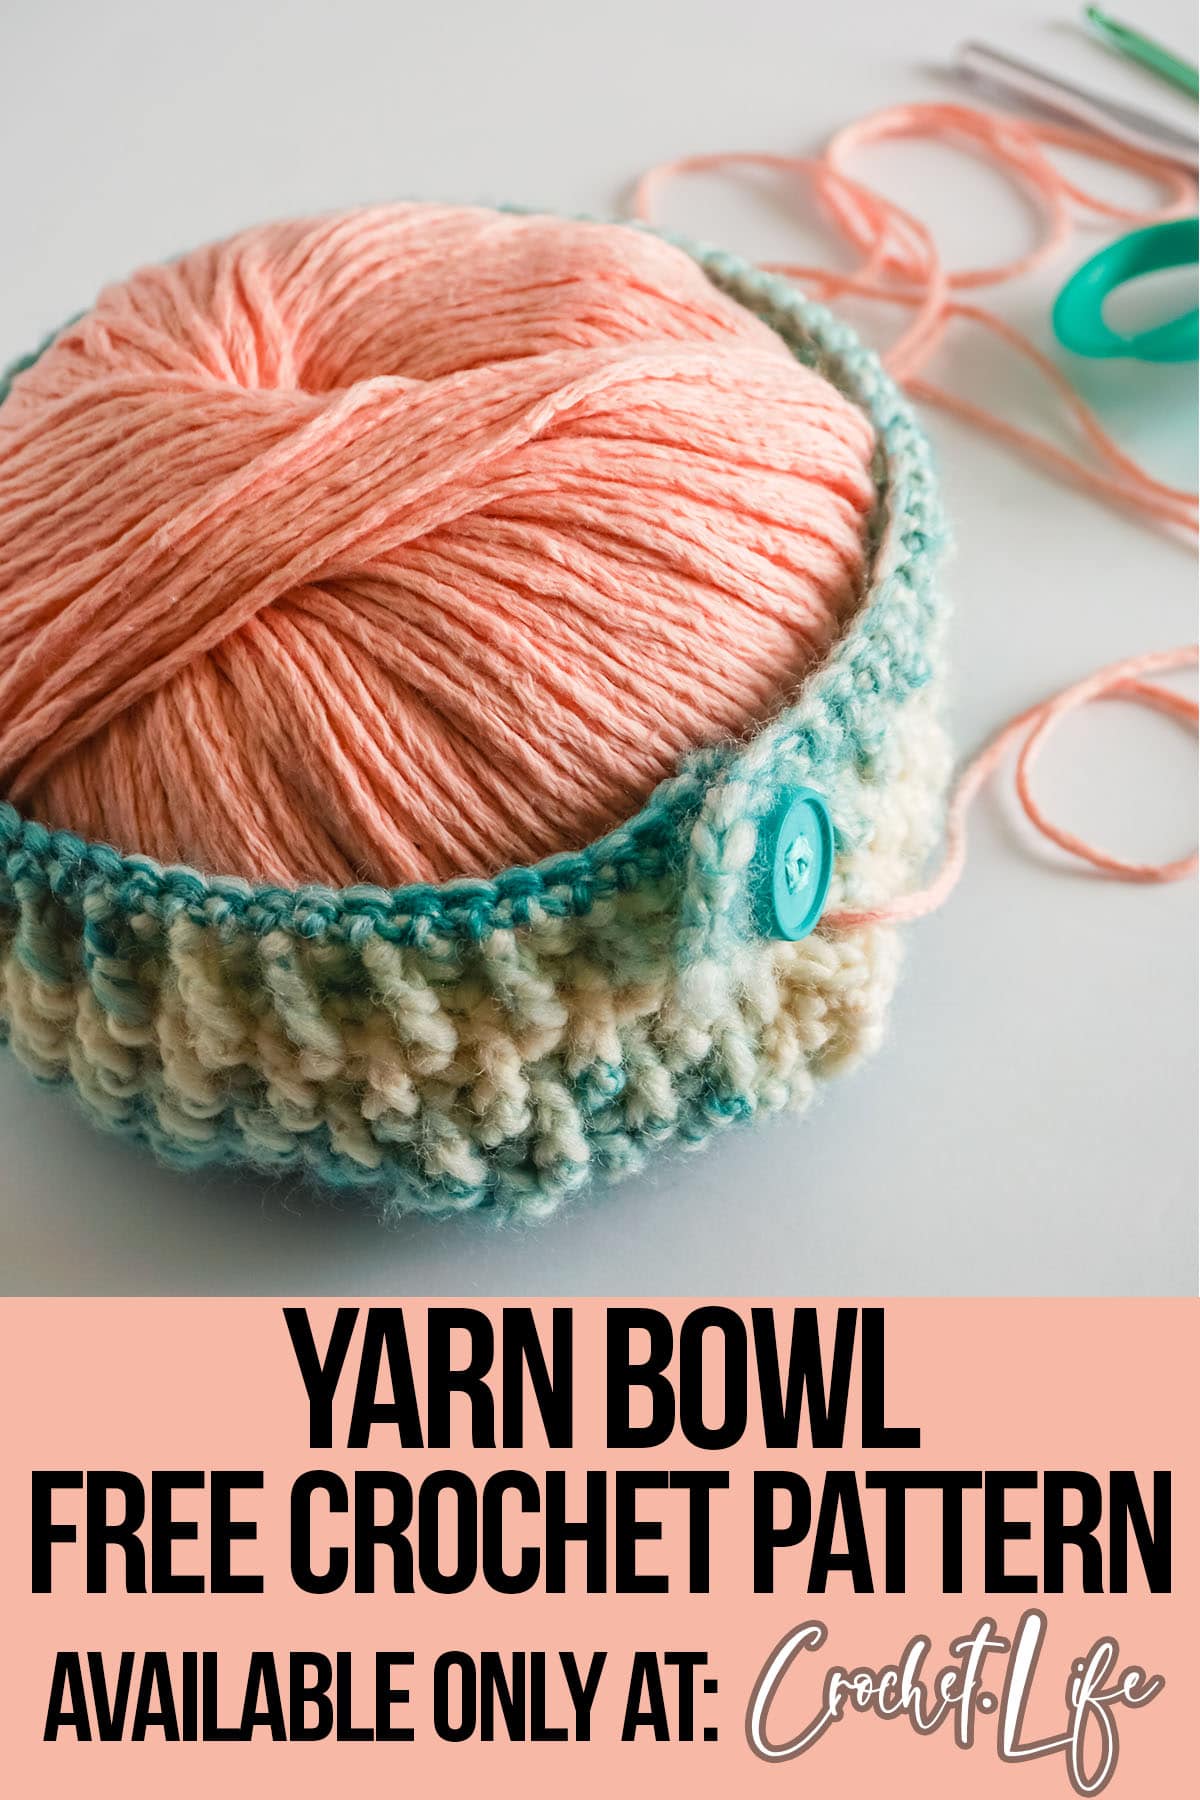 expandable yarn cozy crochet pattern with text which reads yarn bowl free crochet pattern